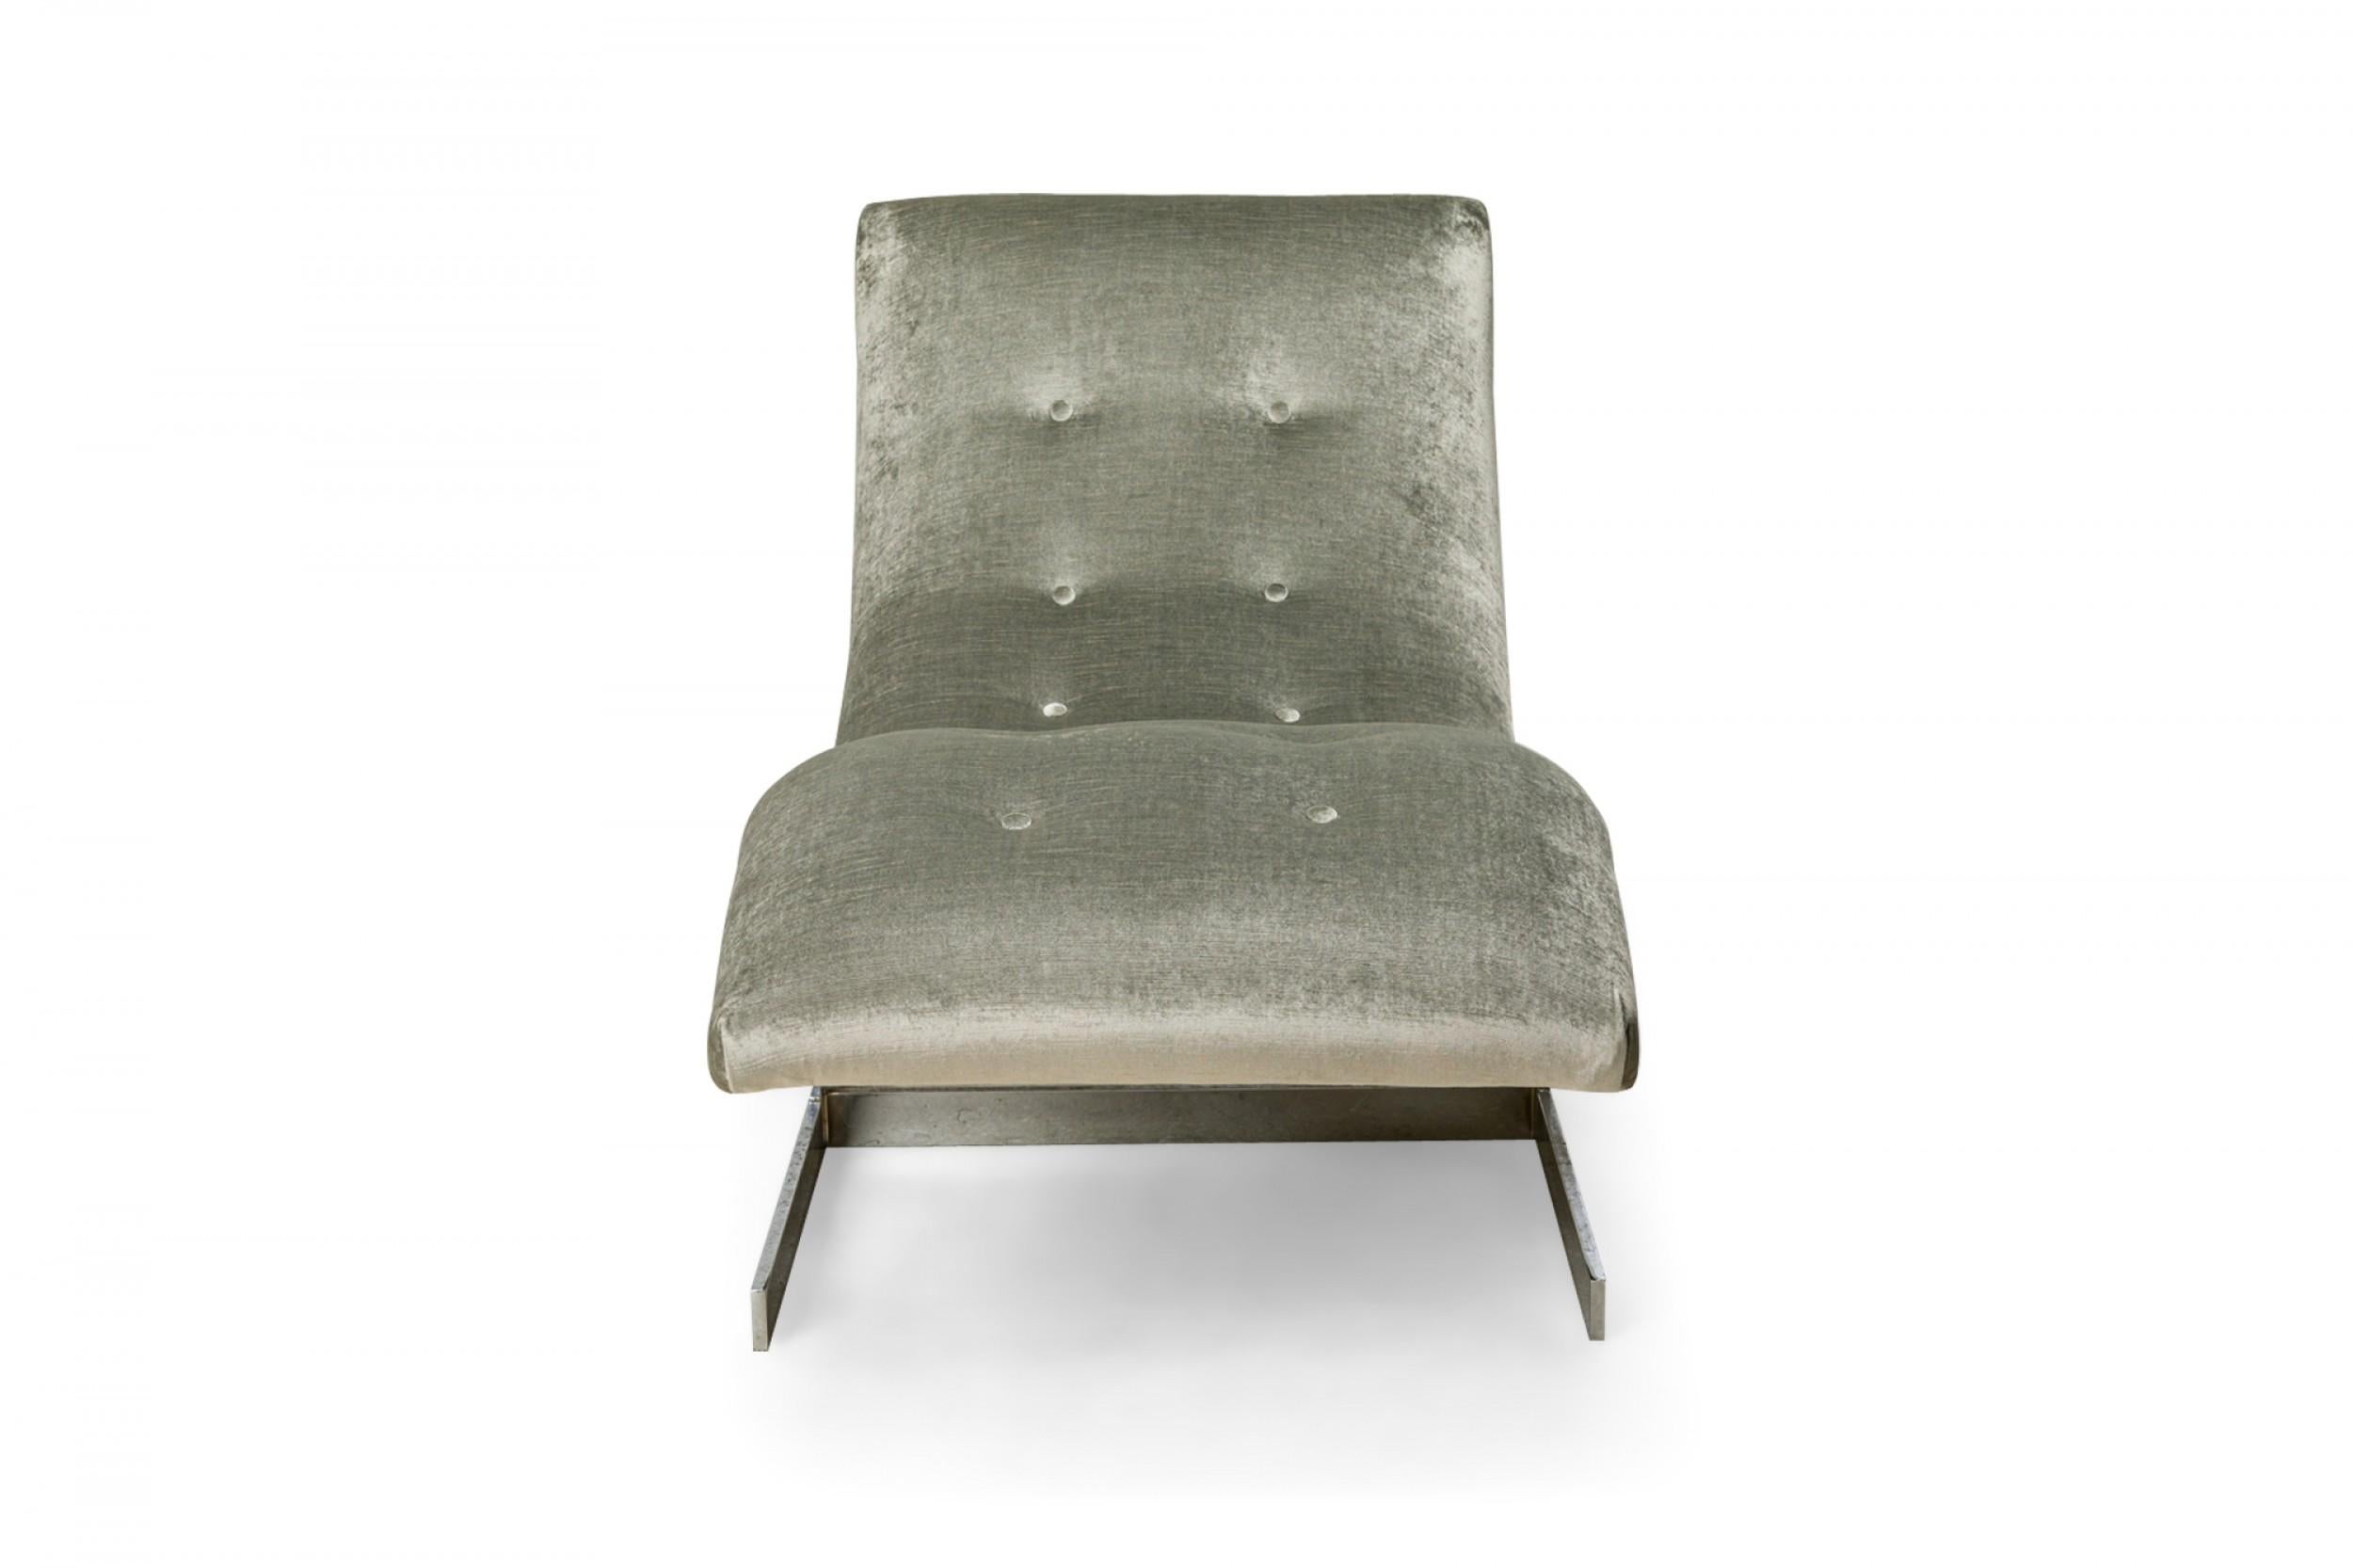 American Mid-Century 'wave' form chaise lounge with dimensional silver velour button tufted upholstery with a T-shaped polished chrome base. (CARSONS)(Available in different upholstery: DUF0350, DUF0352, DUF0353)
